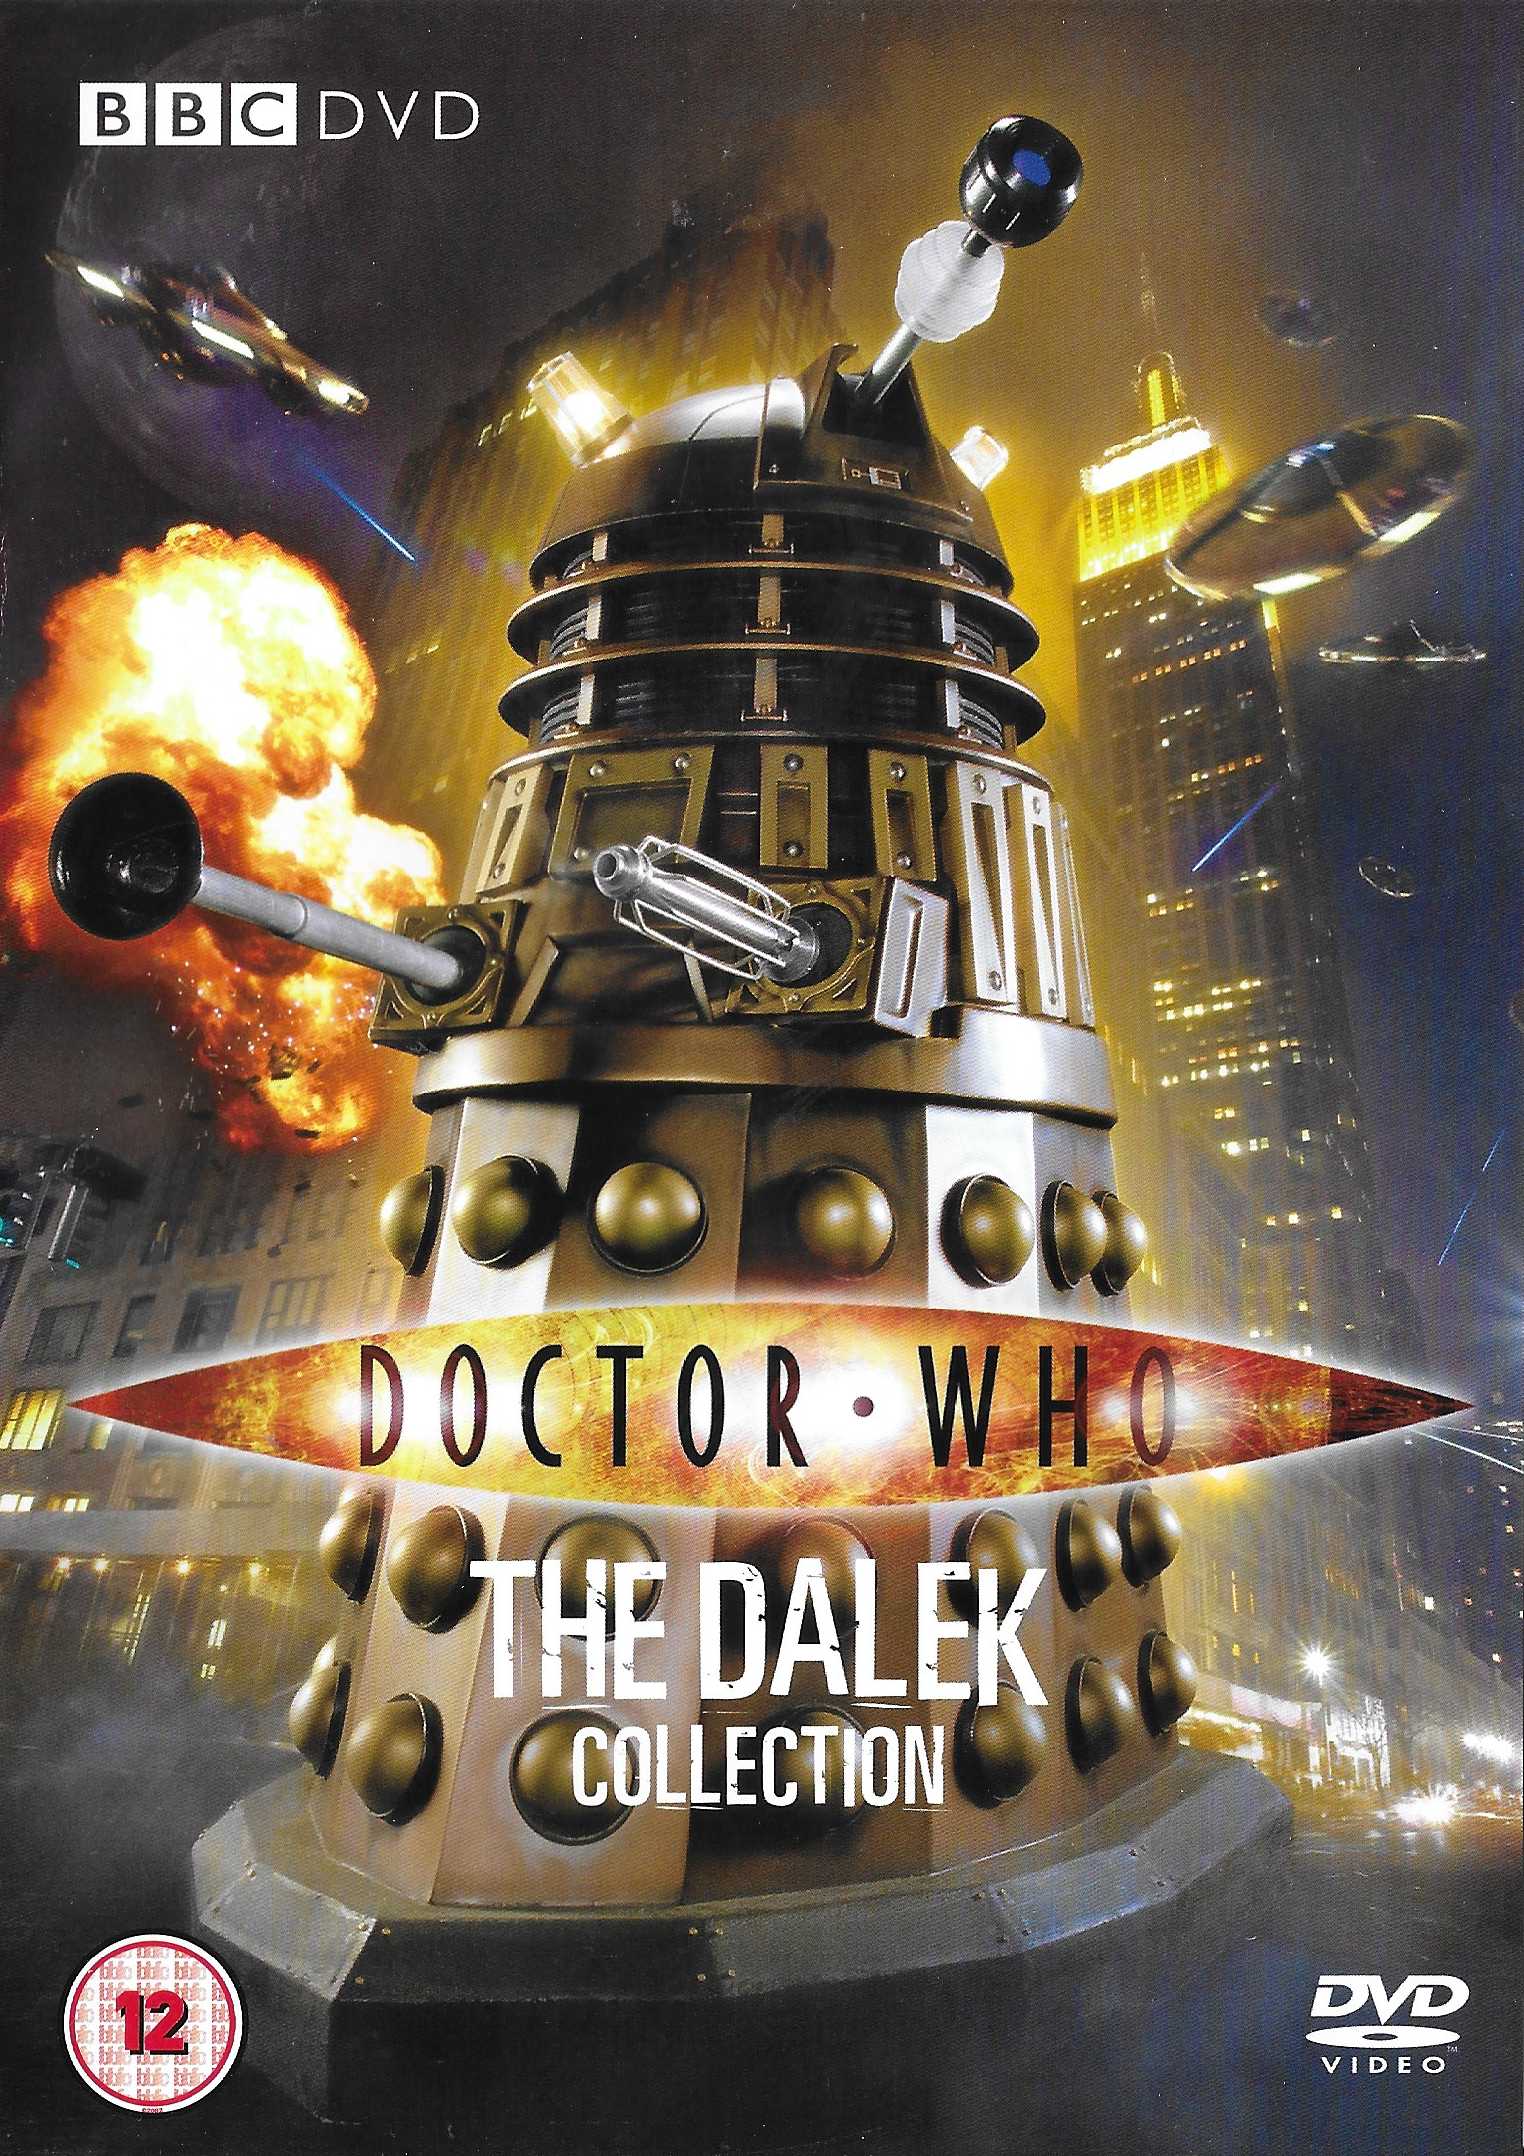 Picture of BBCDVD 2998 Doctor Who - The Dalek collection by artist Robert Shearman / Helen Raynor / Russell T Davies from the BBC dvds - Records and Tapes library